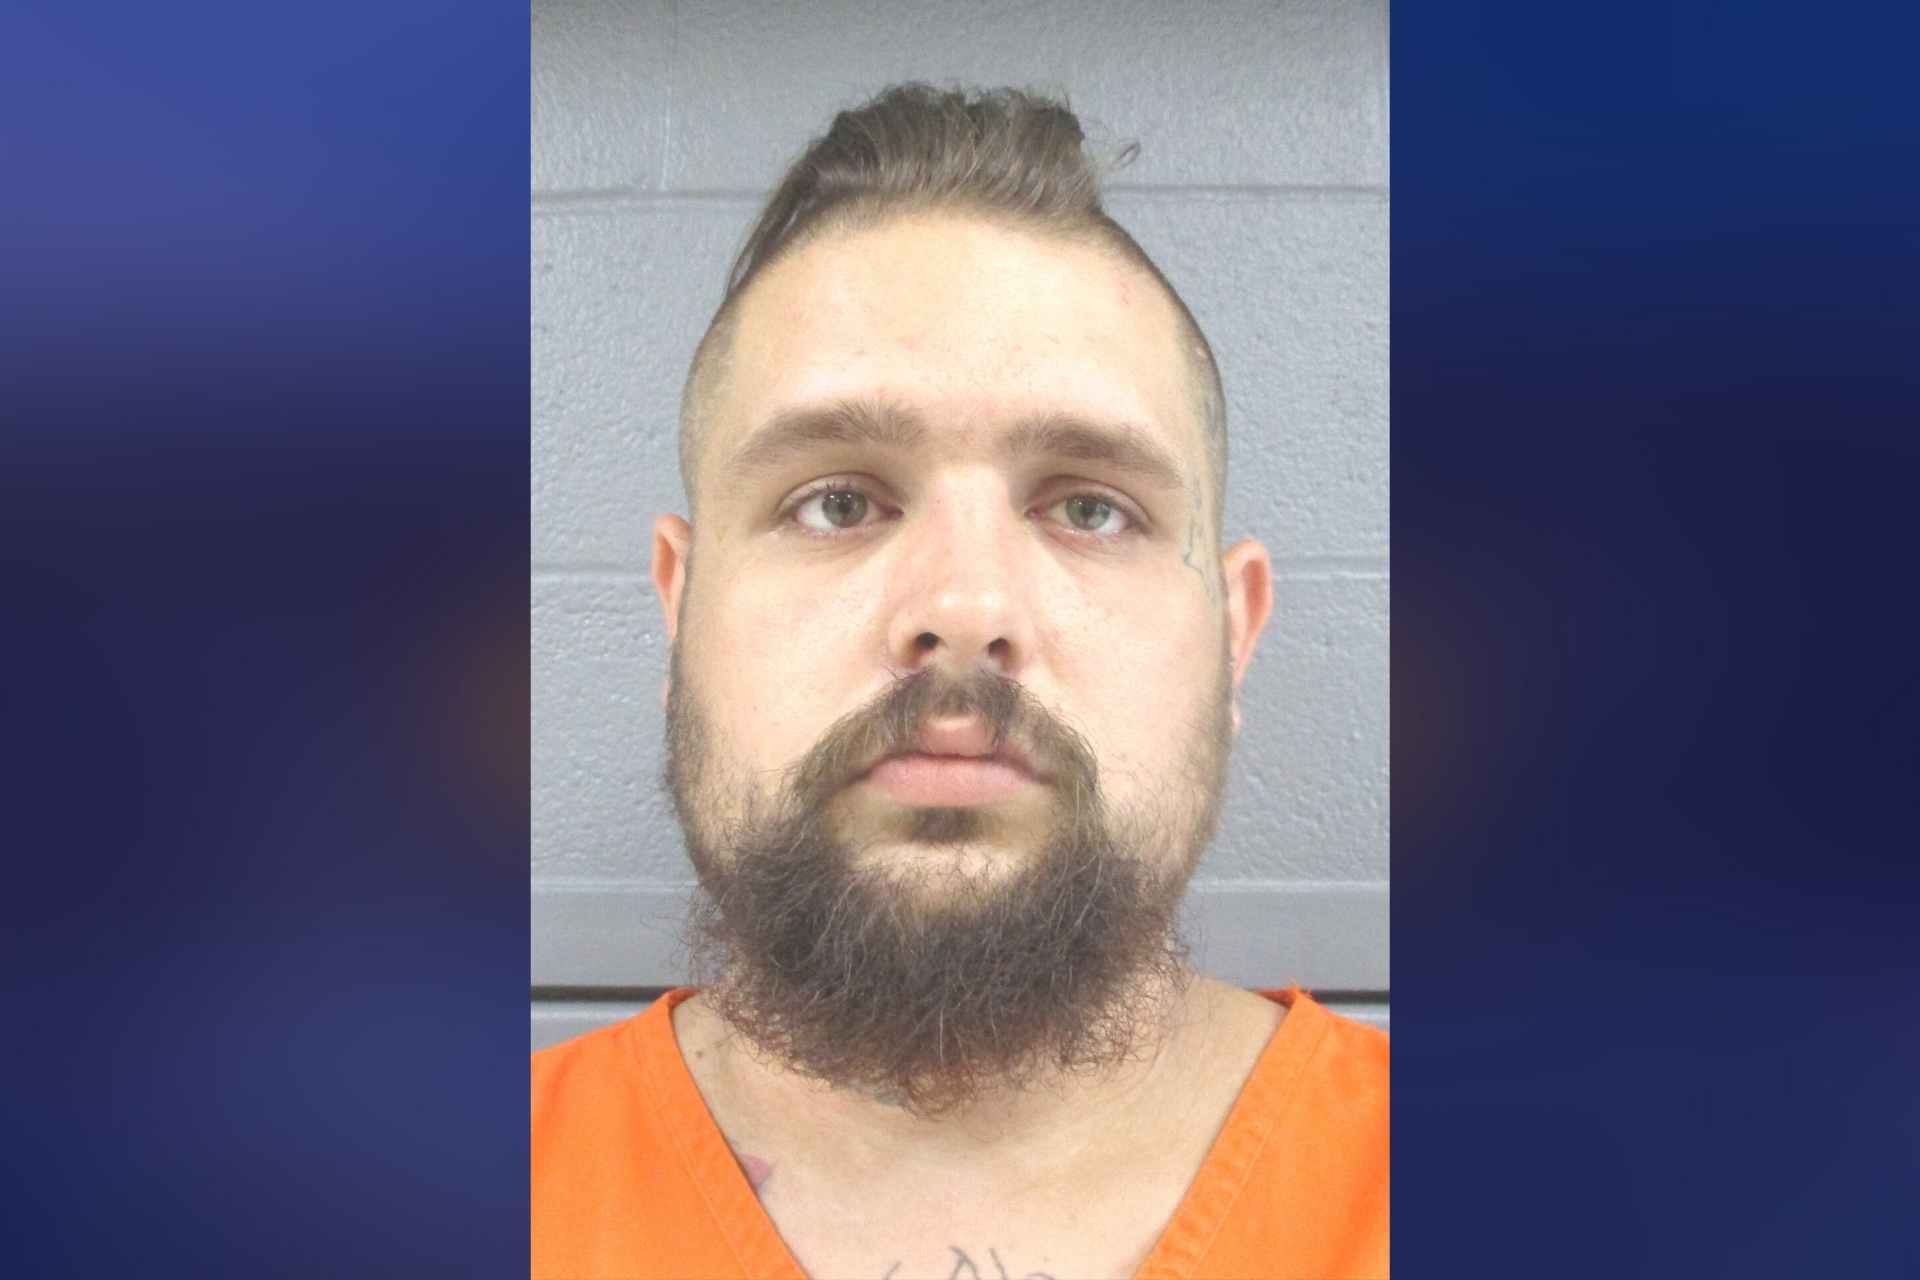 Buckhannon man arrested for 65 counts of fraudulent use of a credit card